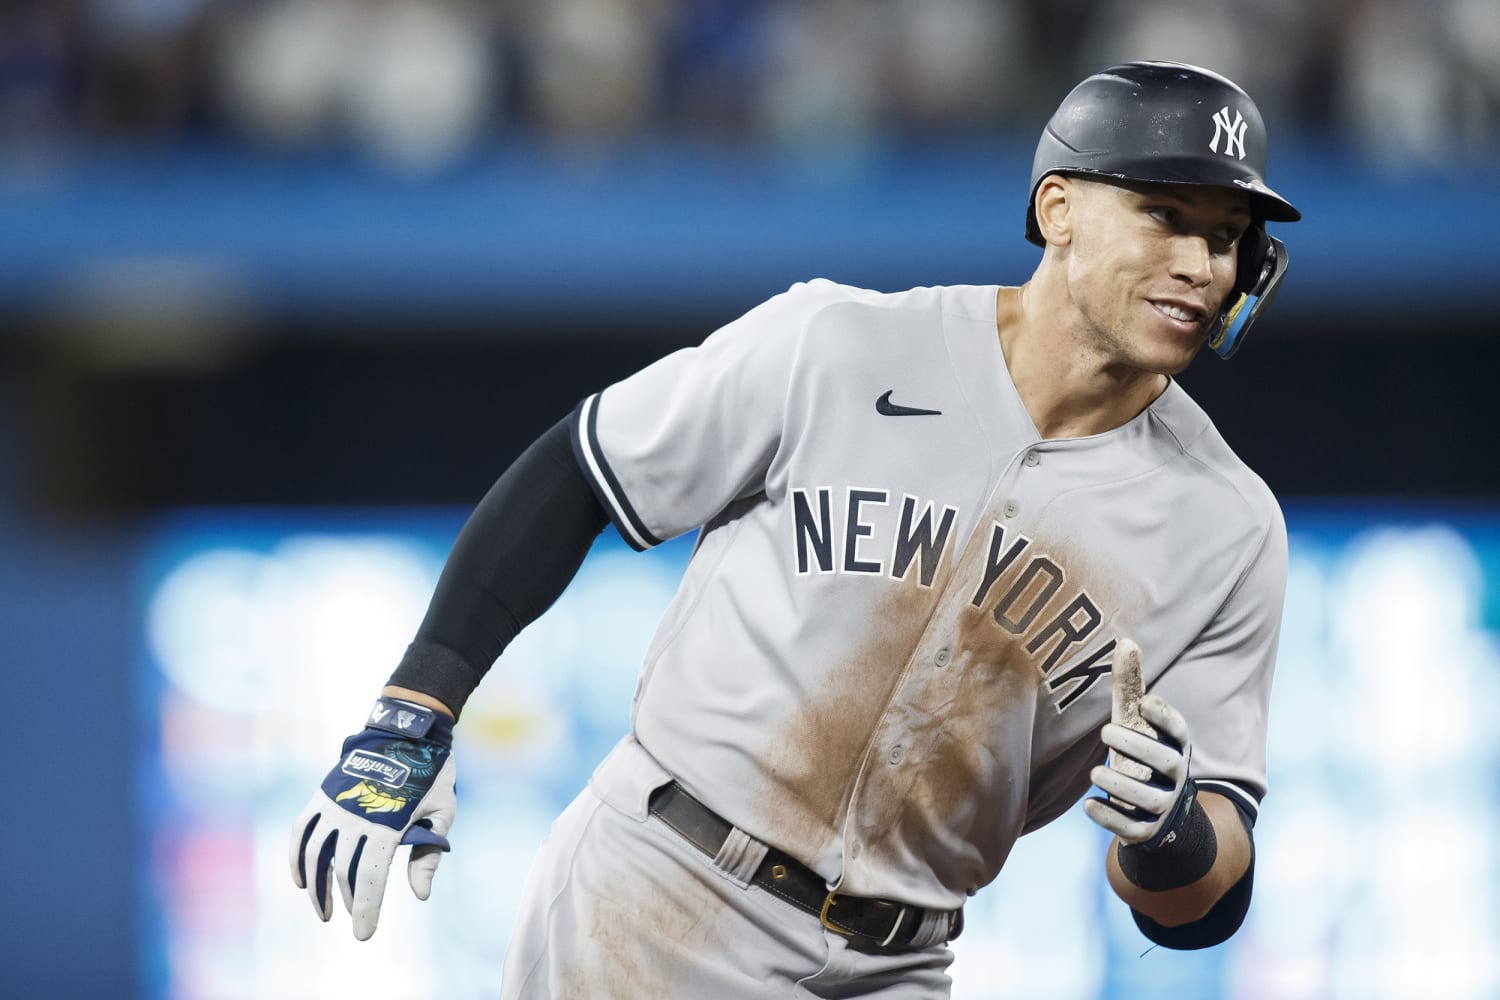 Aaron Judge stays hungry, launches BP homer to faraway concession